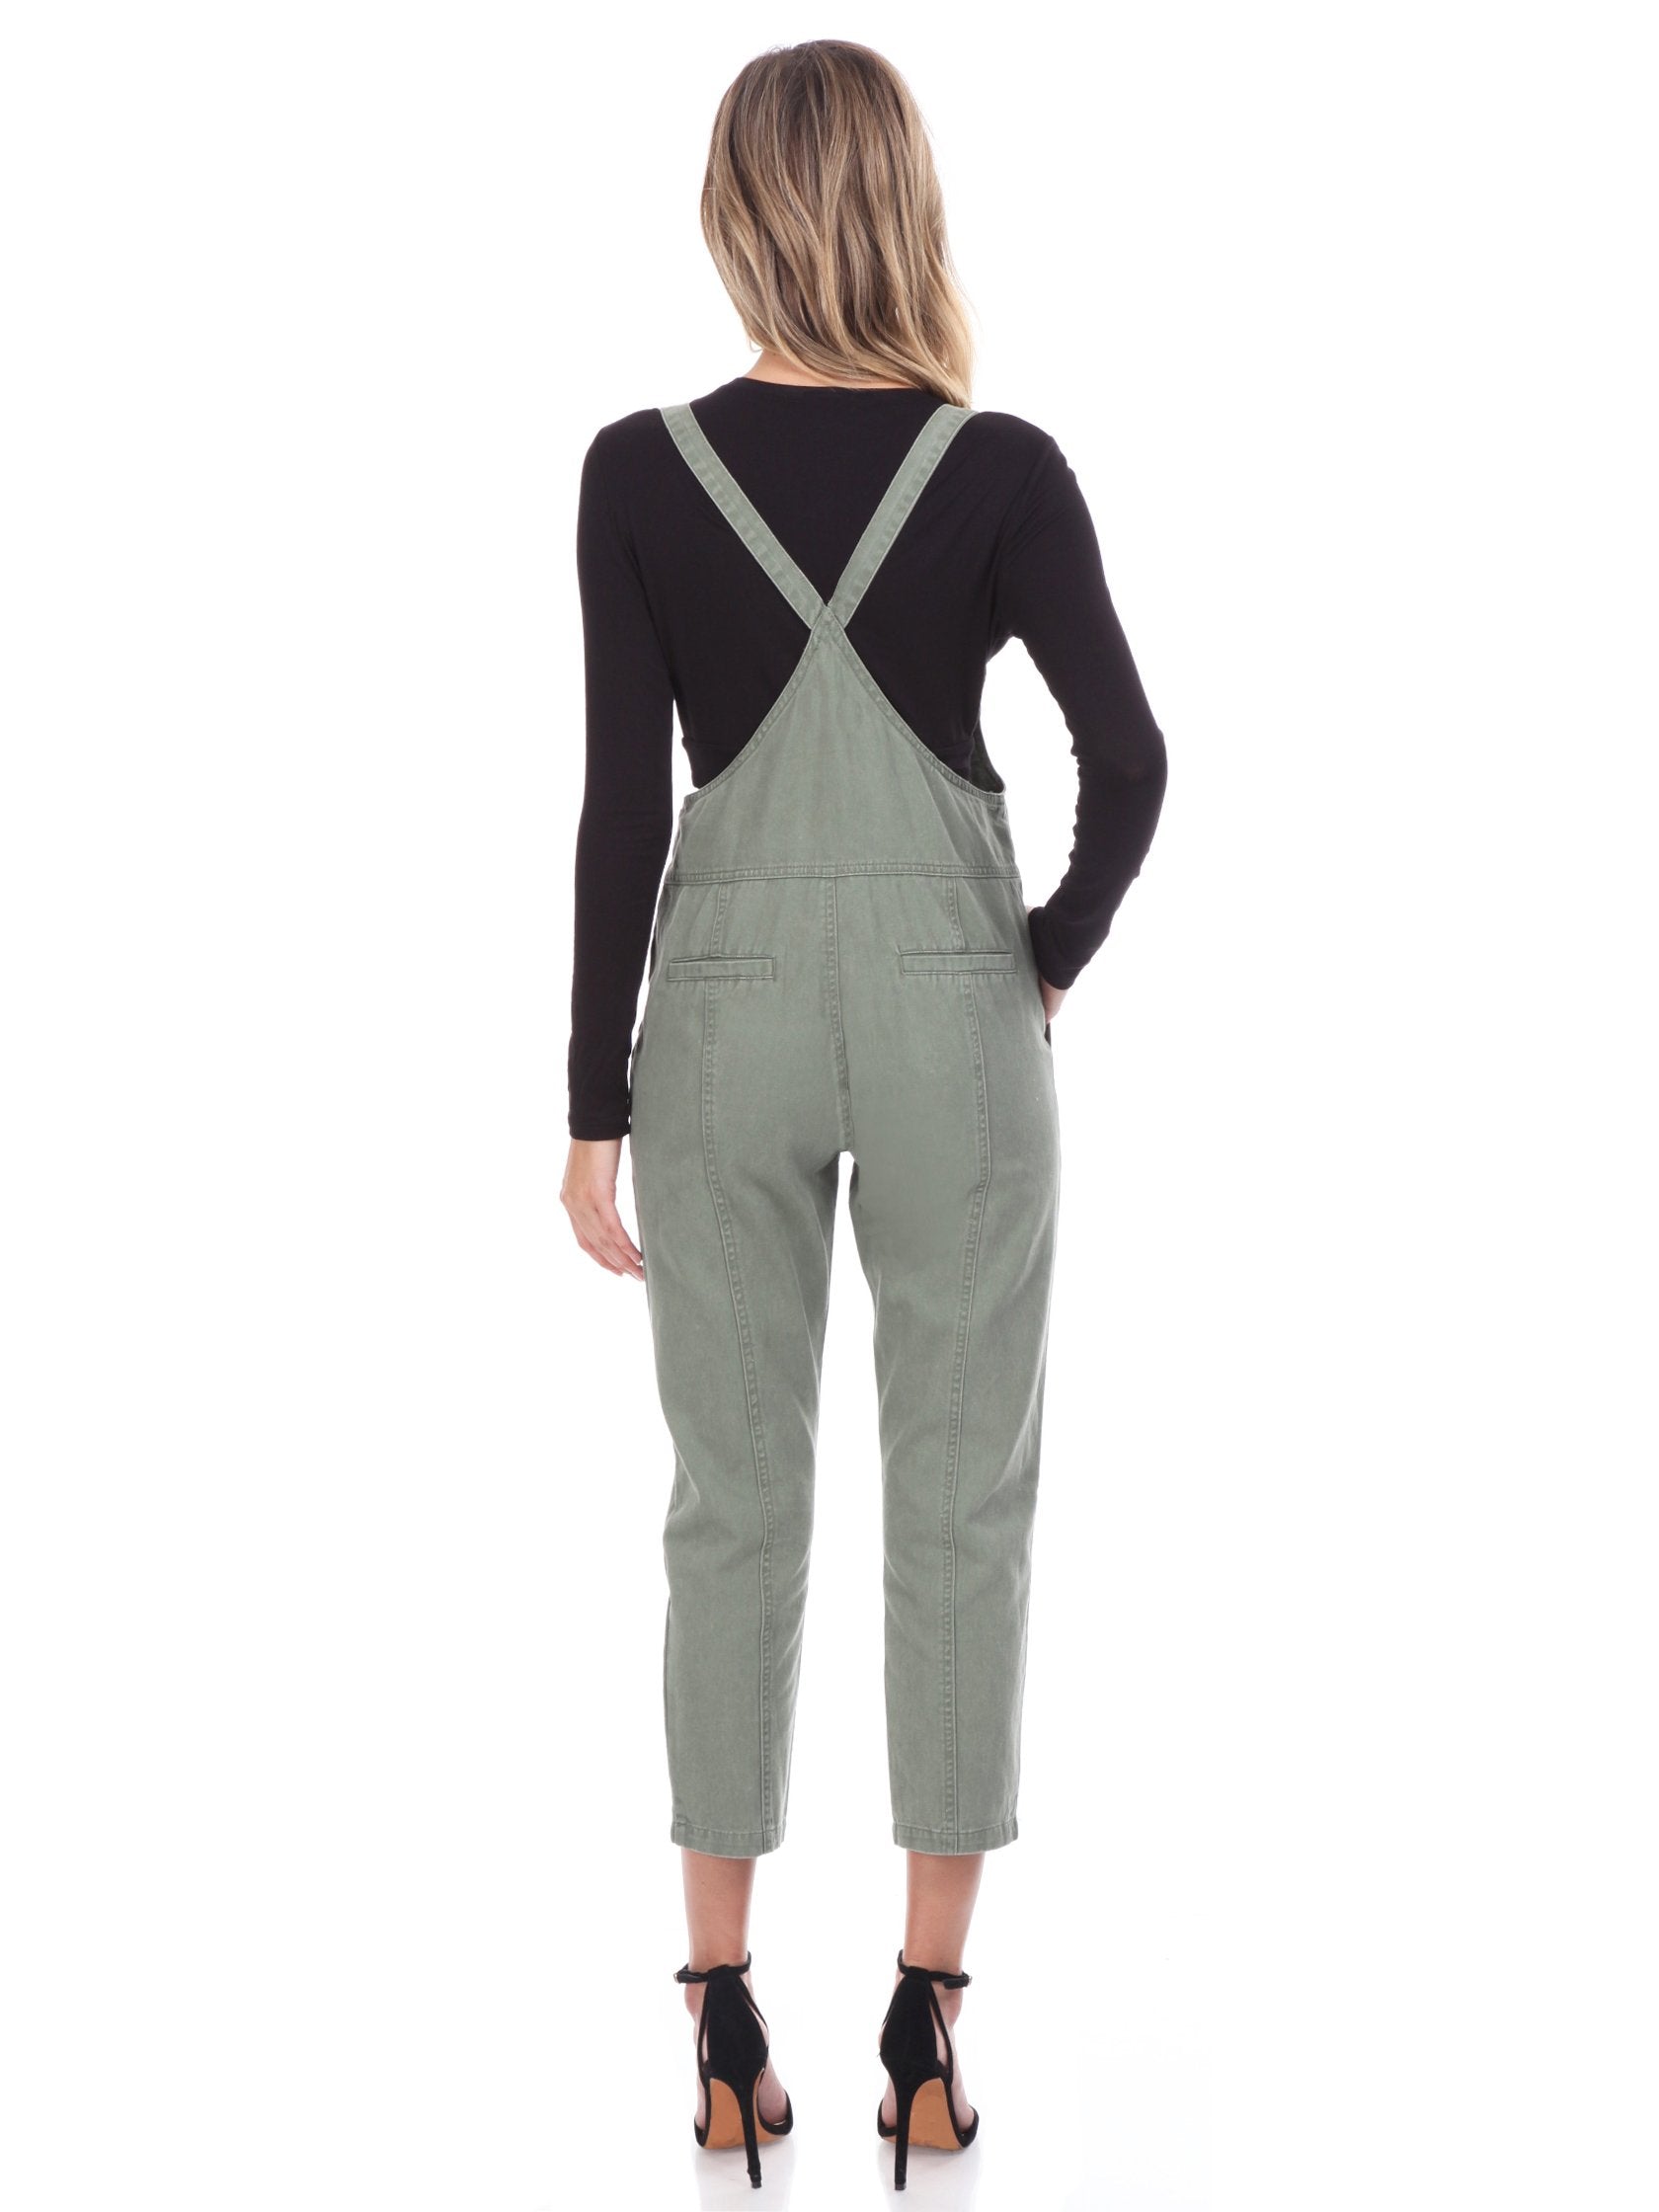 Women wearing a jumpsuit rental from FashionPass called Want It All Overalls